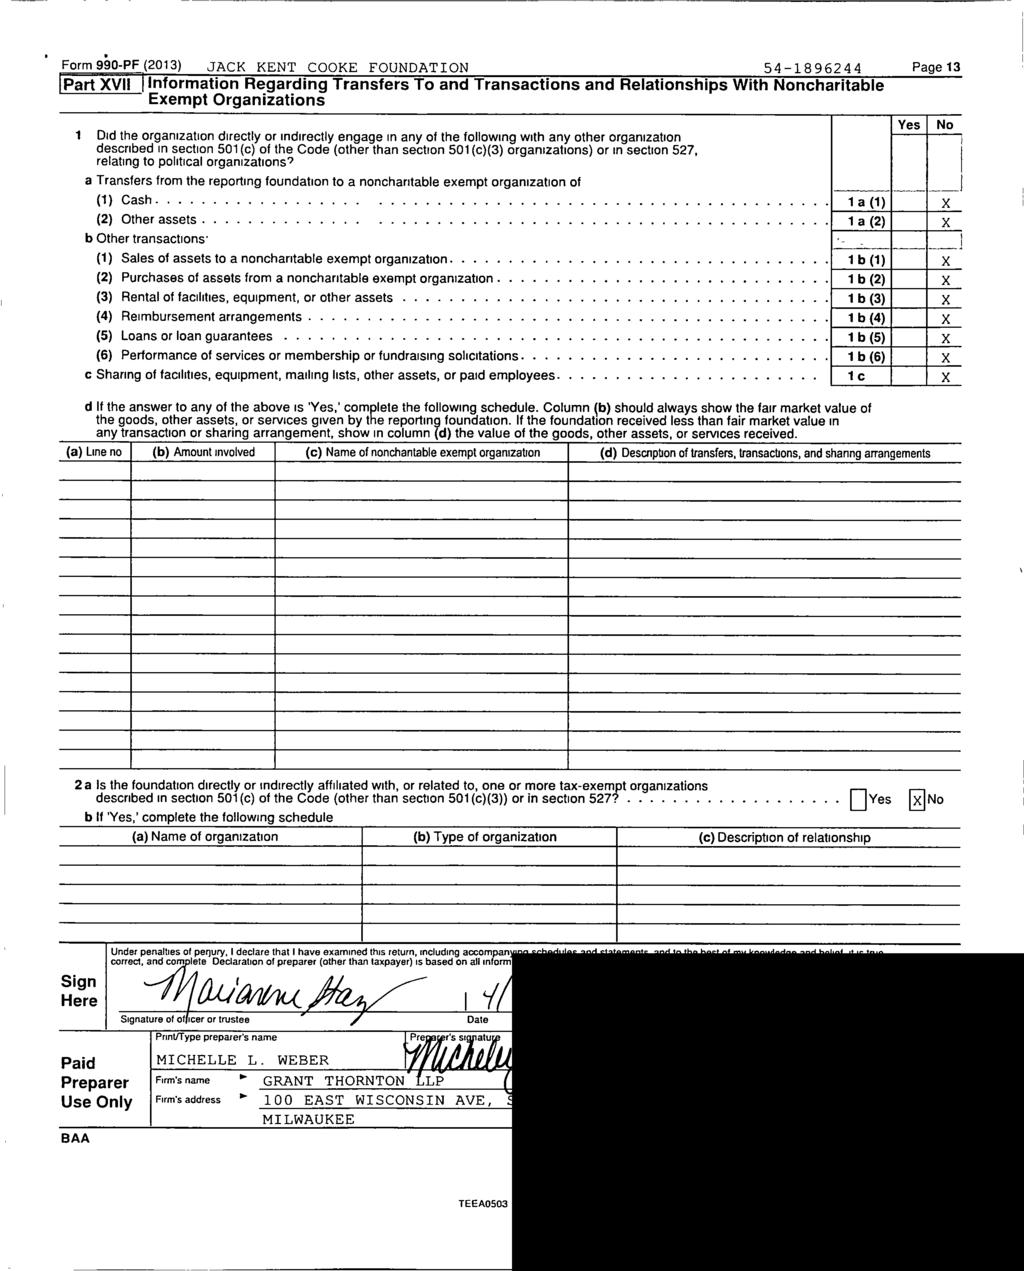 Form 990 - PF (2013 ) JACK KENT COOKE FOUNDATON 54-1896244 Page 13 Part XVi nformation Regarding Transfers To and Transactions and Relationships With Noncharitable Exempt Organizations 1 Did the